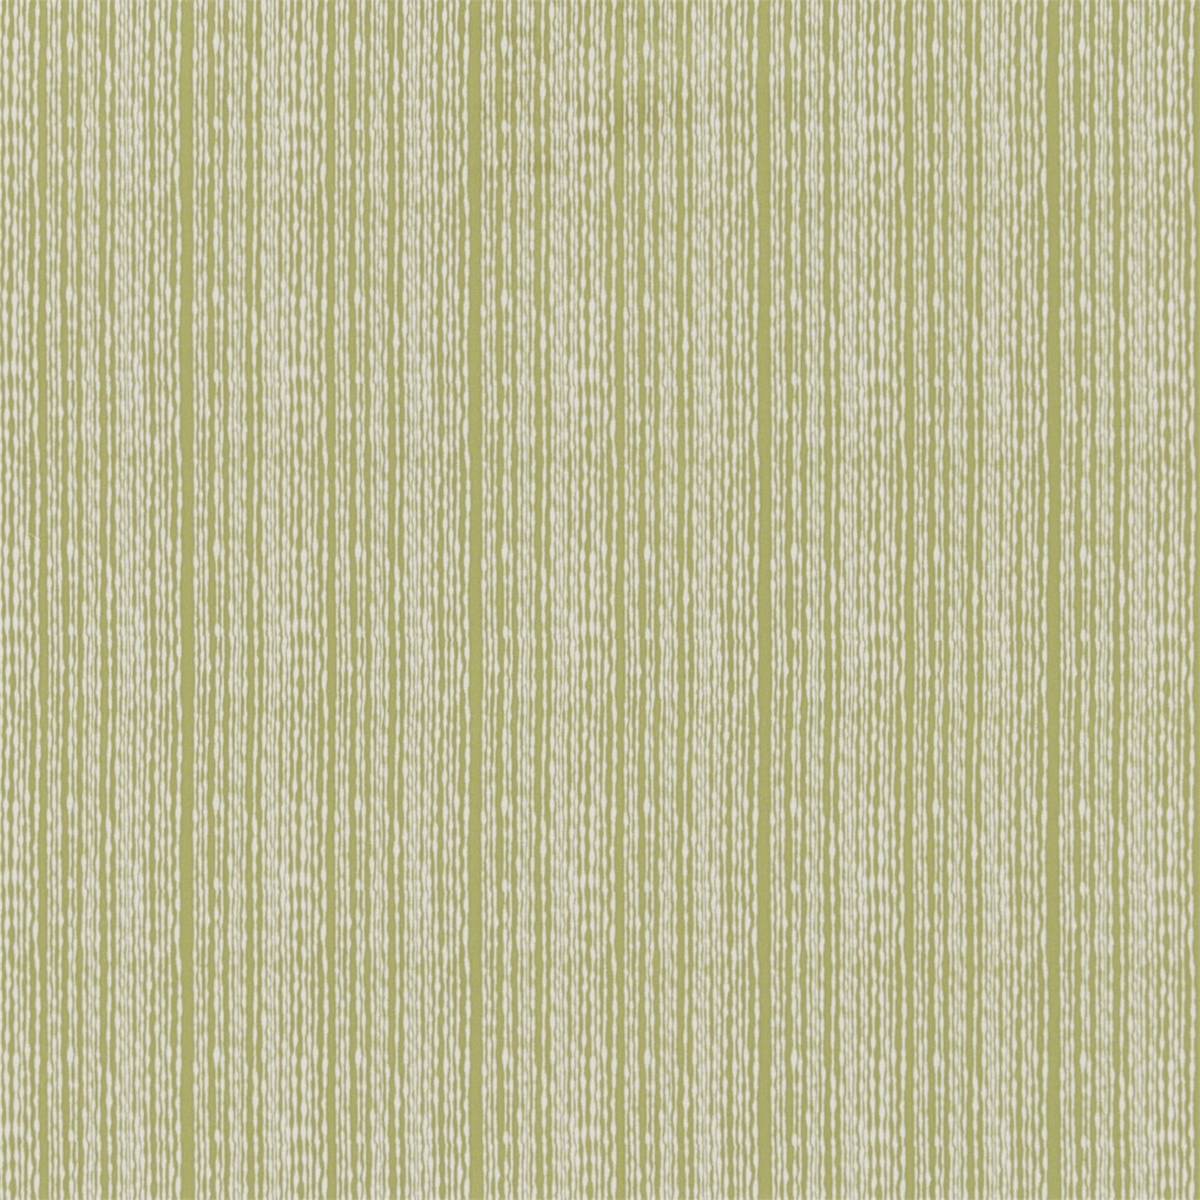 Filament Pistachio Chalk Fabric by Harlequin